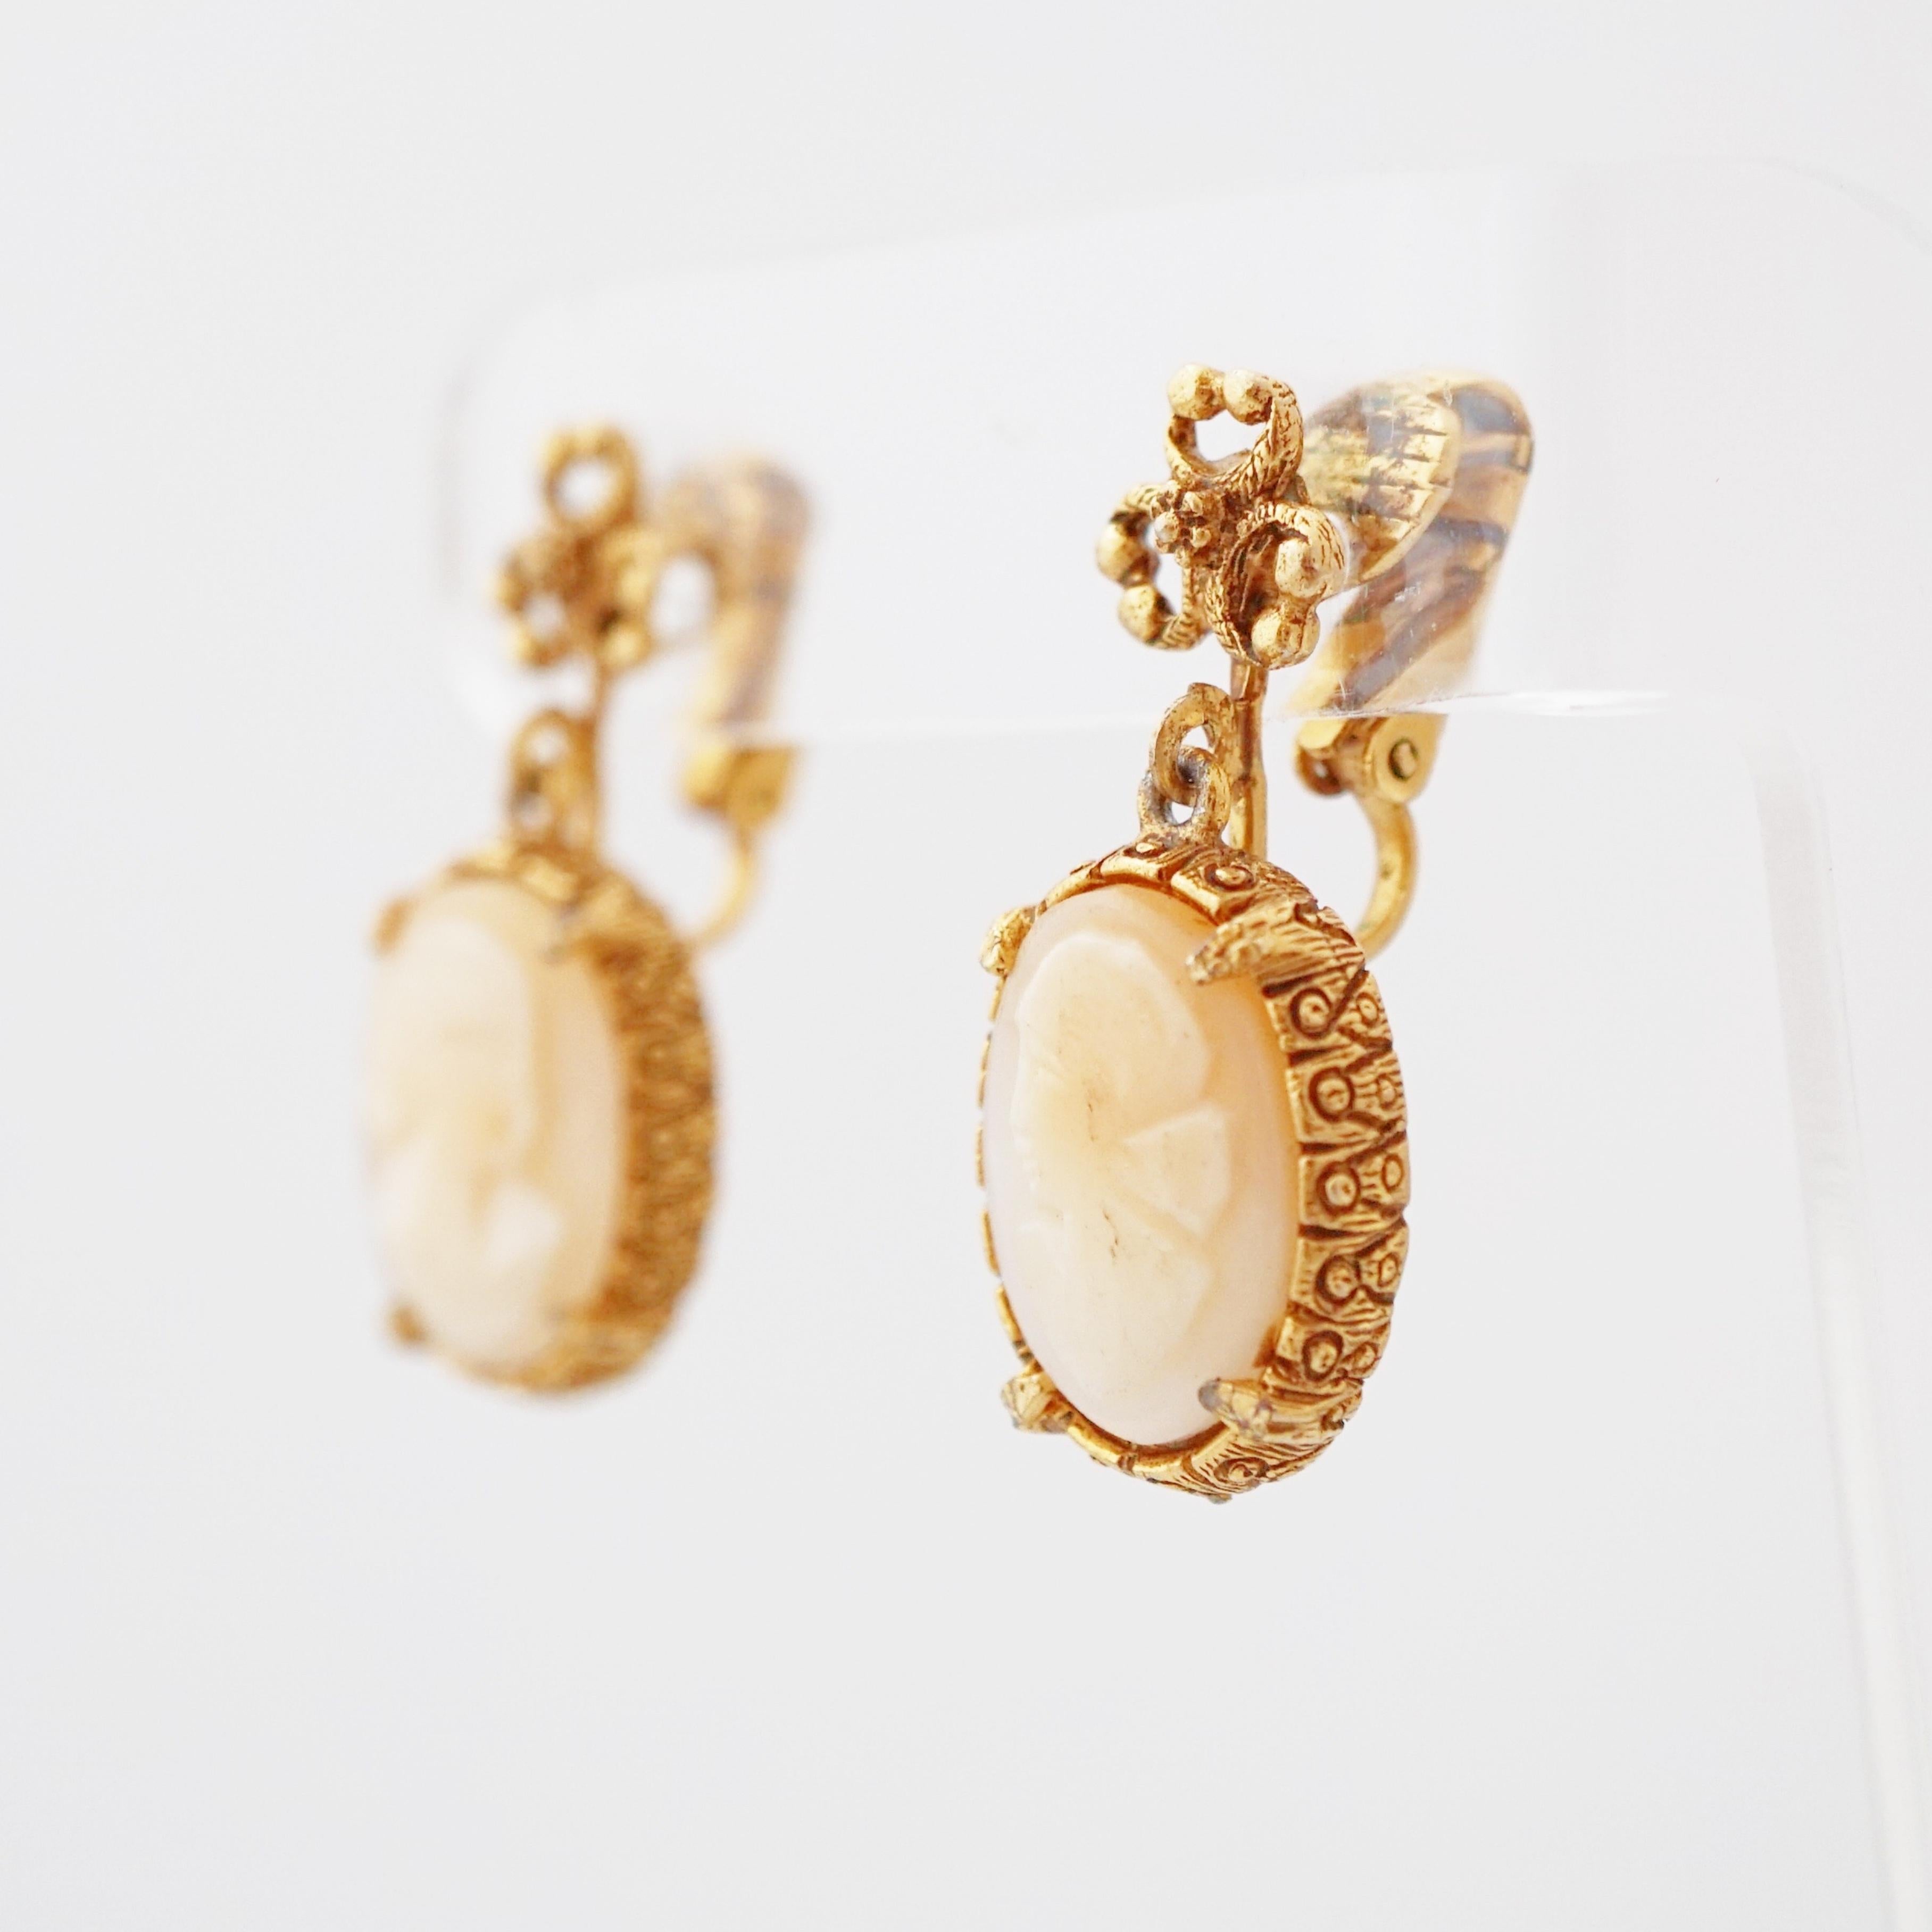 - Vintage item

- Collectible costume jewelry piece from the mid-century

- Each earring measures 1.25